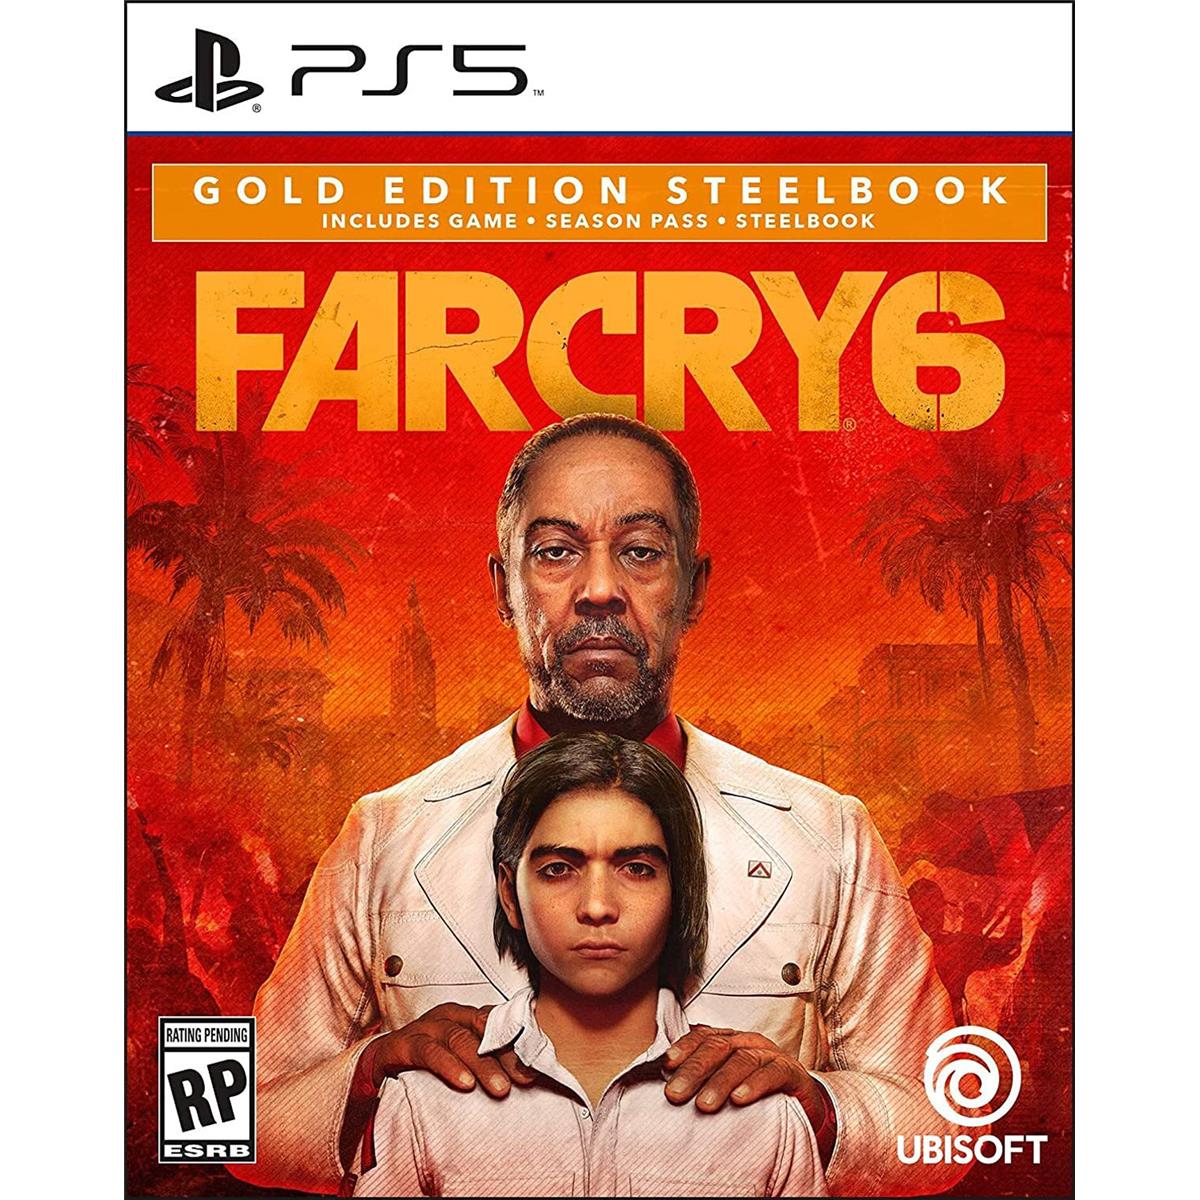 Photos - Console Accessory Ubisoft Universal Audio  Far Cry 6 Gold Edition SteelBook for PlayStation 5 